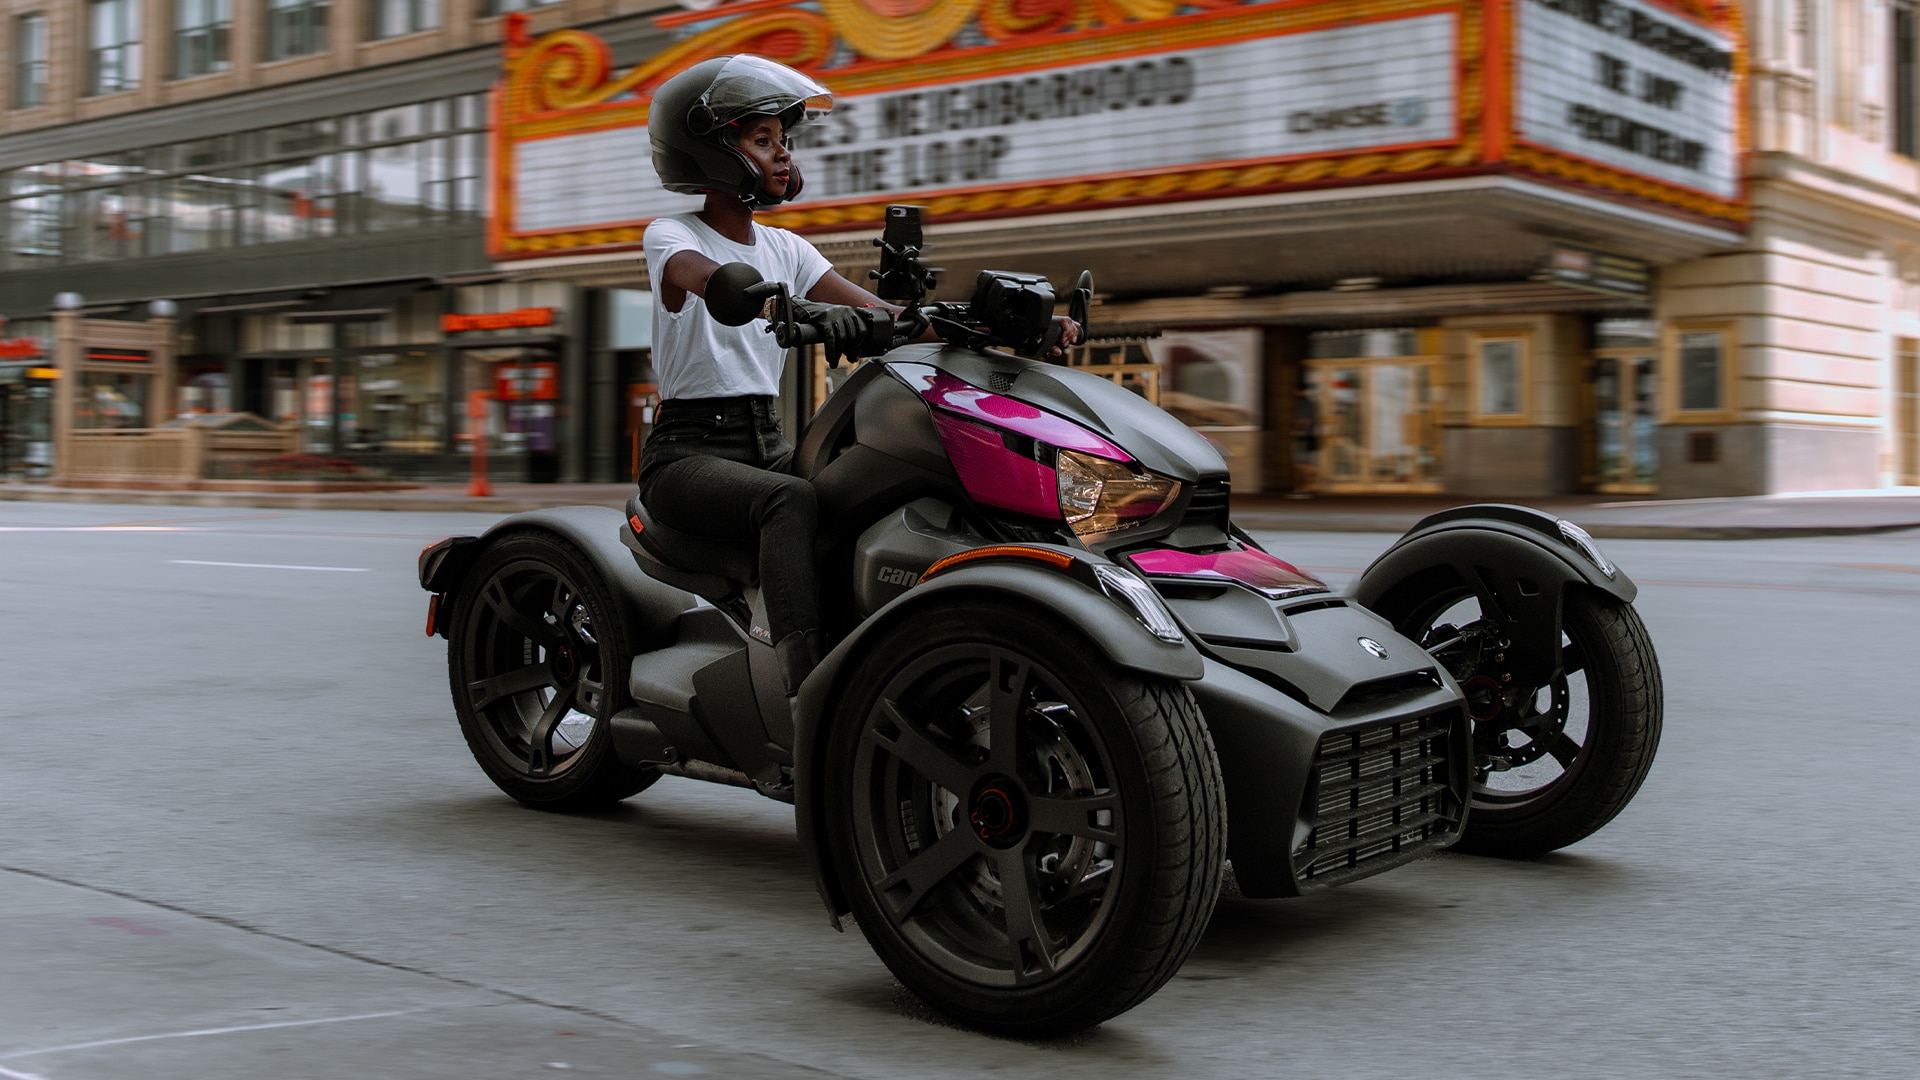 Blake Gifford, Can-Am On-Road ambassador, setting off for a ride on her 3-wheel vehicle